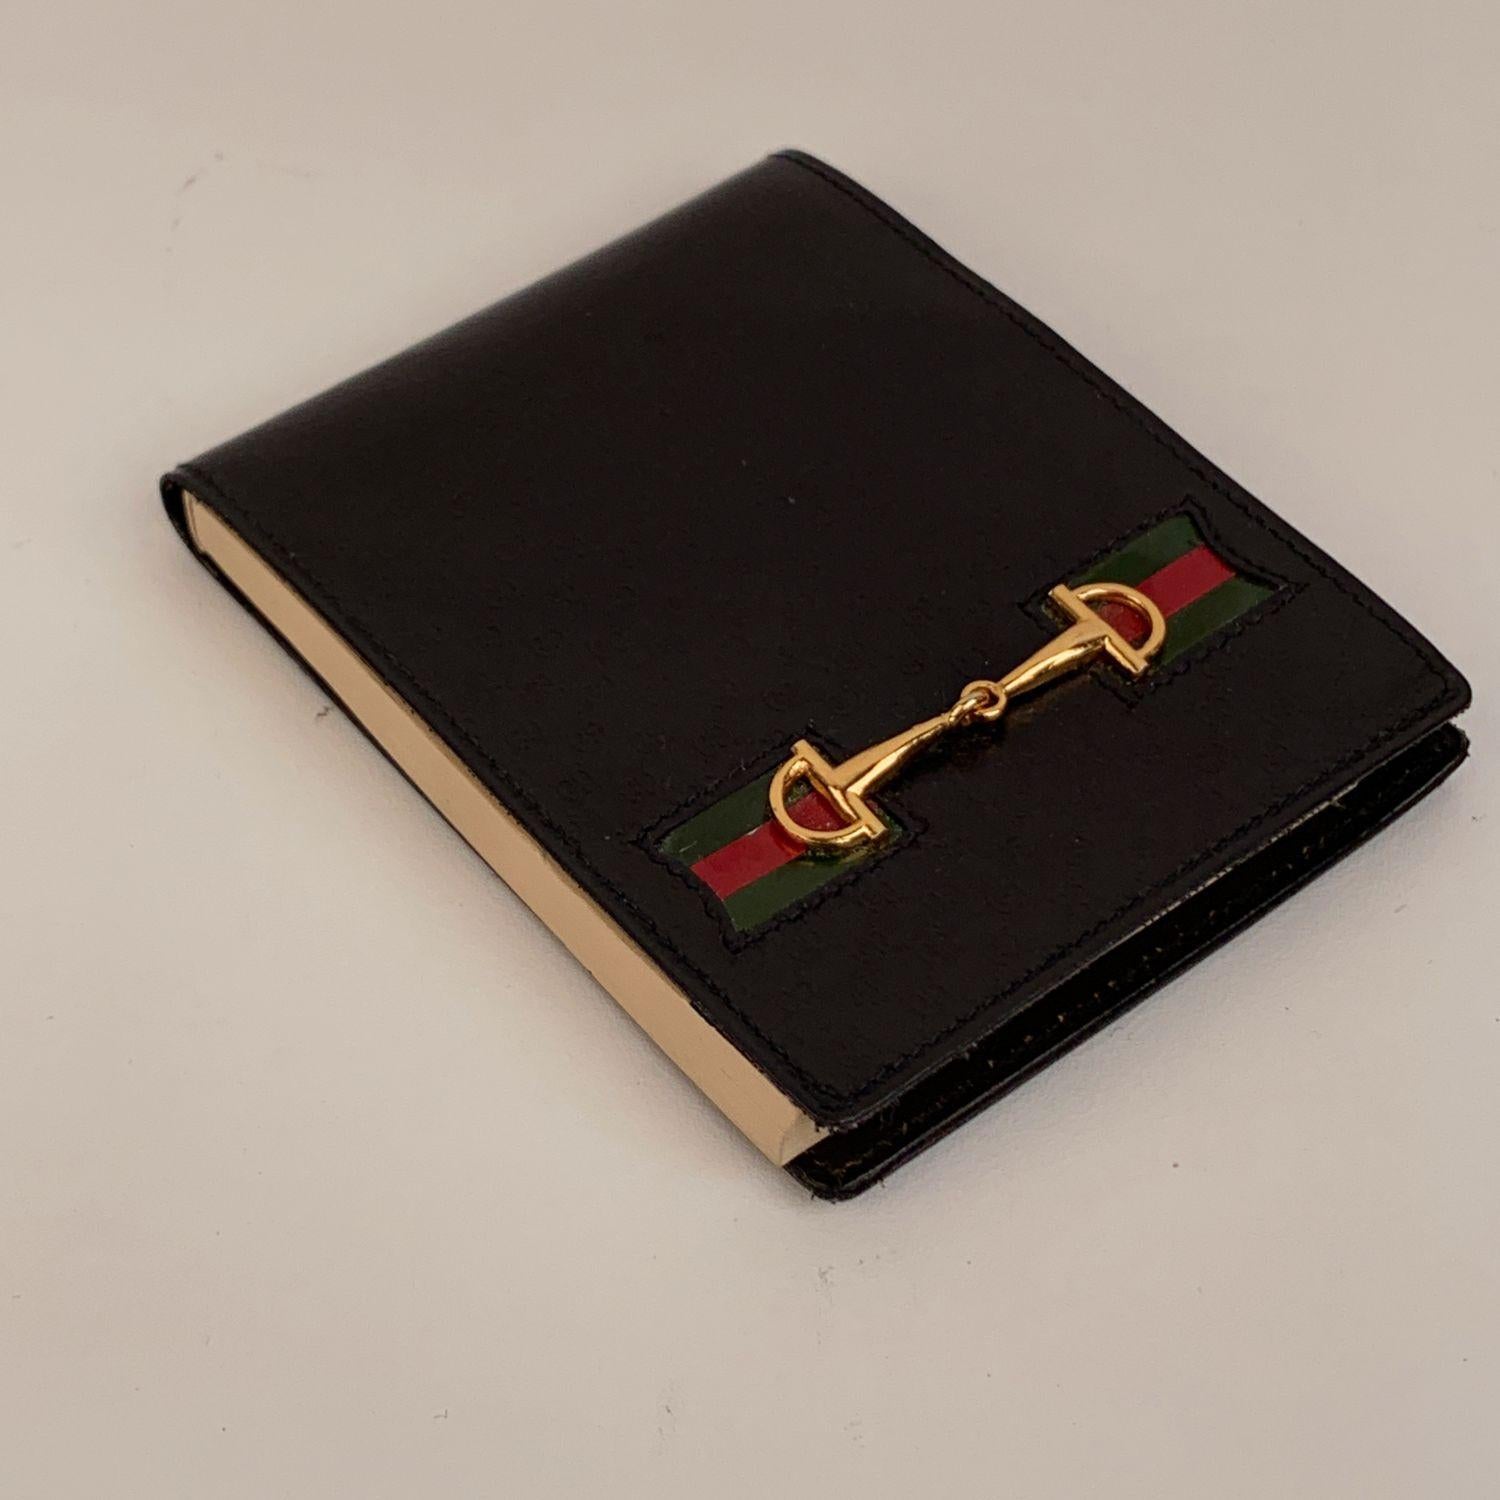 Vintage Gucci pocket notepad with pen. Crafted in black leather with small embossed monograms. It features green/red/green striped and gold metal horsebit on the front. The original Gucci block with blank pages is present. Small gold metal pen